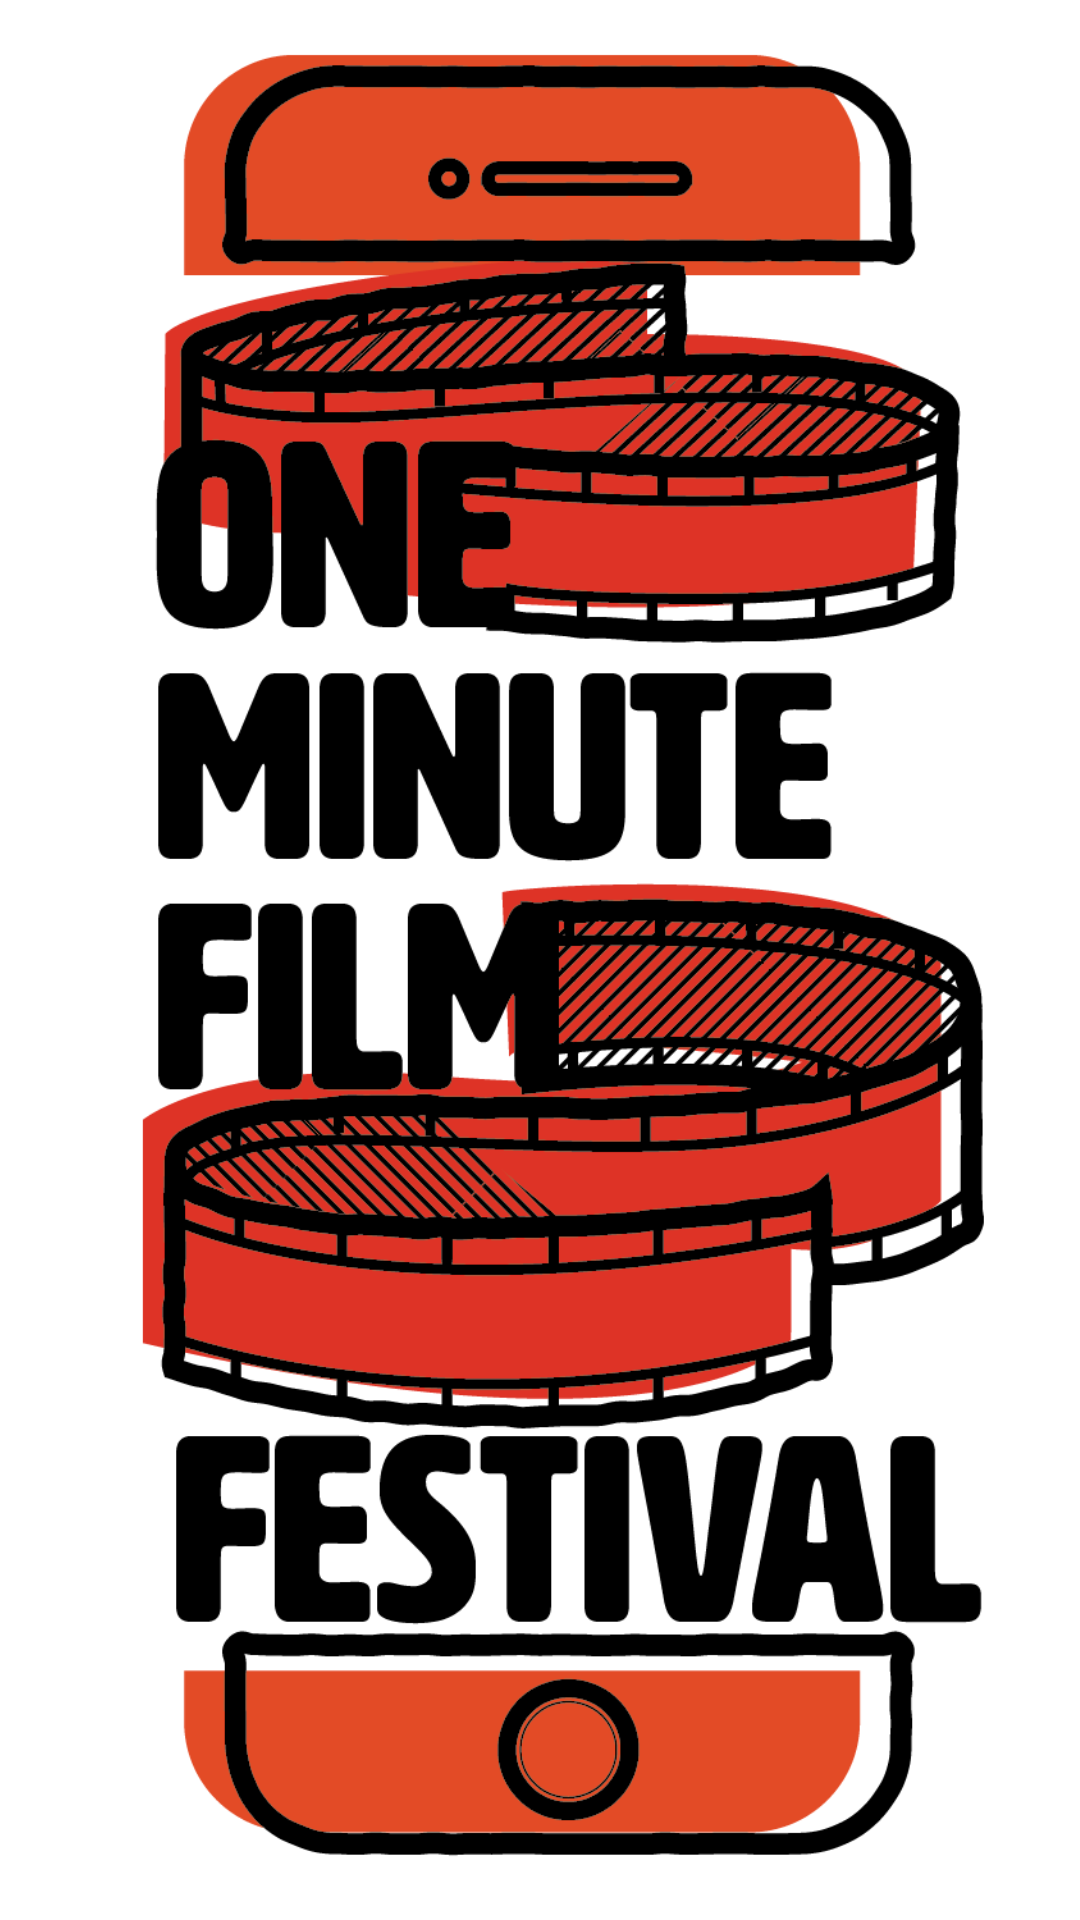 One Minute Film Festival logo with film reels in black and red